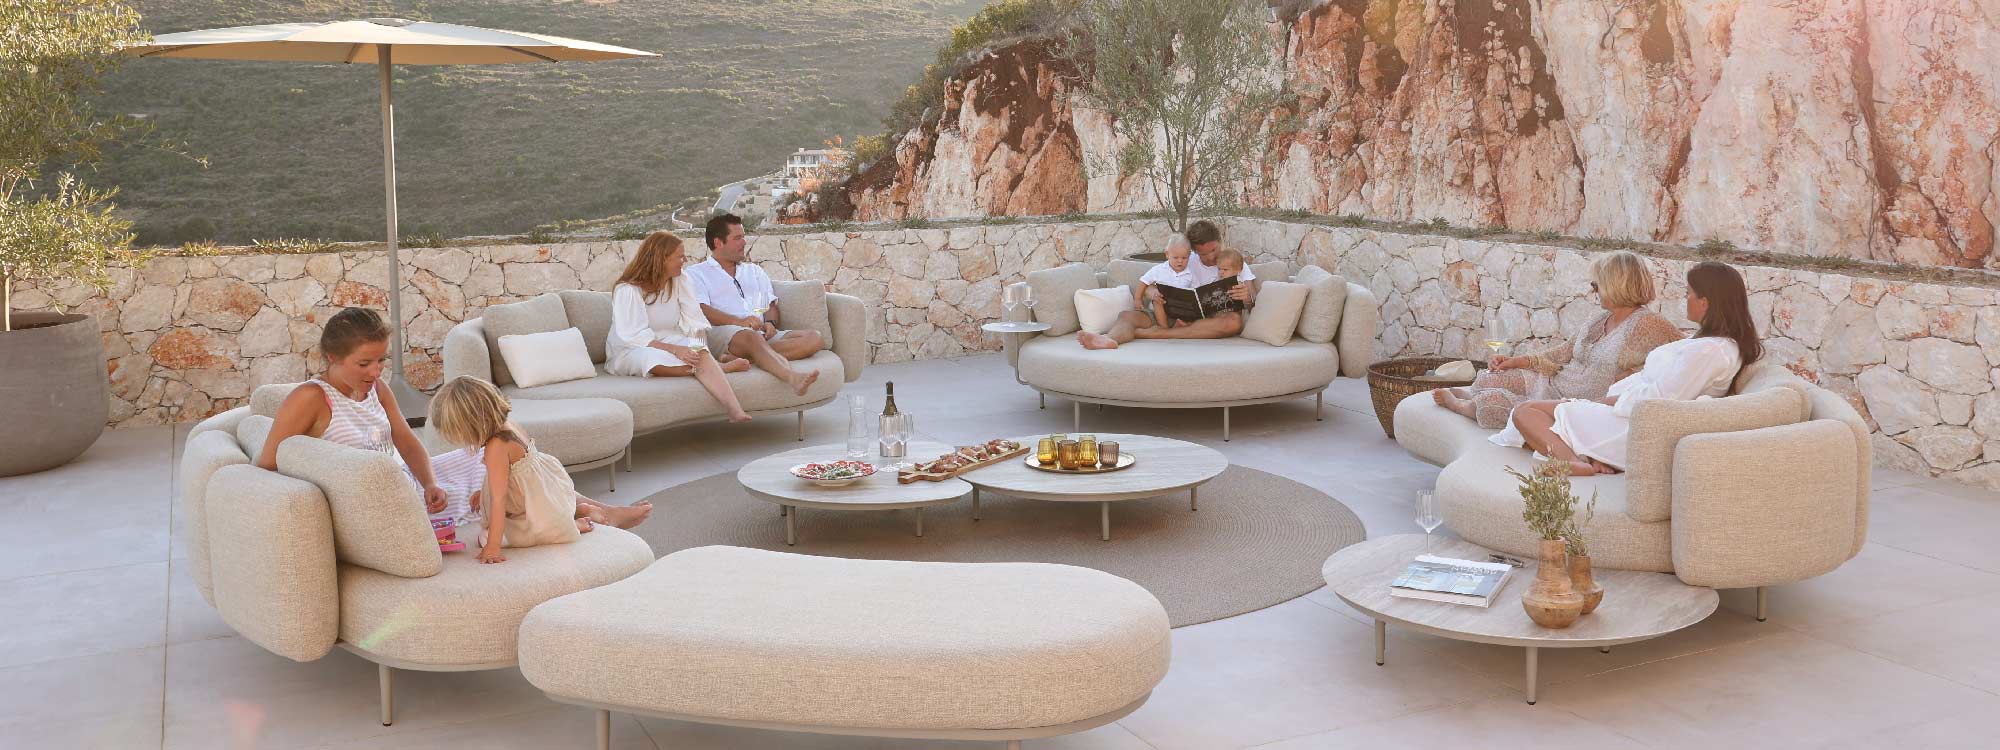 Image of family and friends sat relaxing on multiple Organix garden sofas by Royal Botania